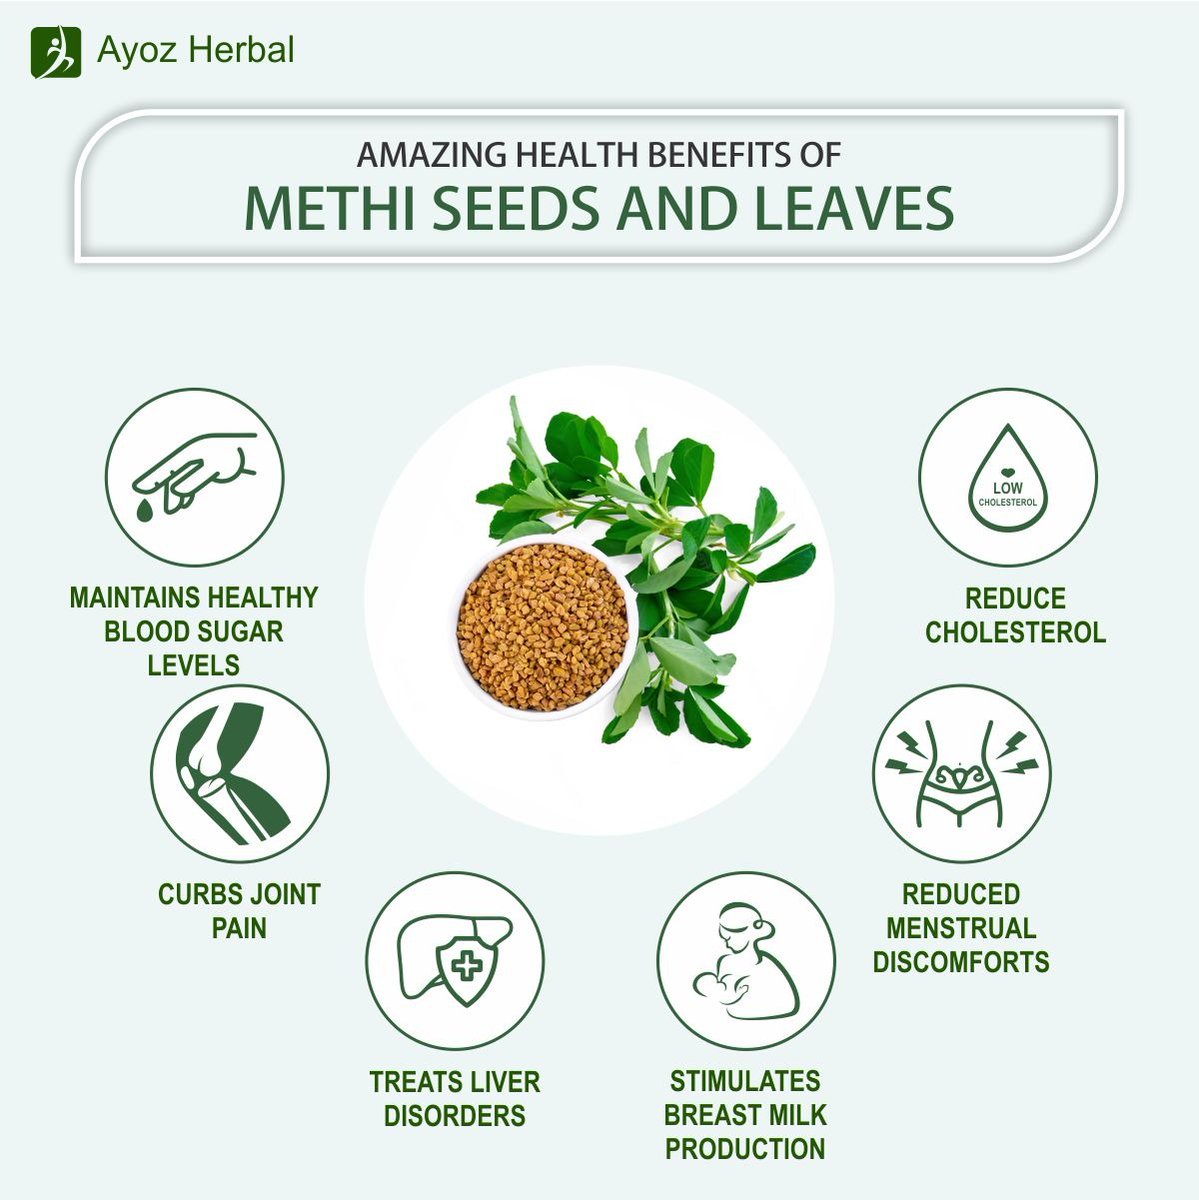 #ayozherbal Healthy Benefits Of Methi Seeds And Leaves.
.
.
#benefits #methibenefits #methiseeds #methileaves #manybenefits #maintanhealth #healthyfood #maintaineveryday #weightloss #reducecholesterol #jointpain #liverdisorders